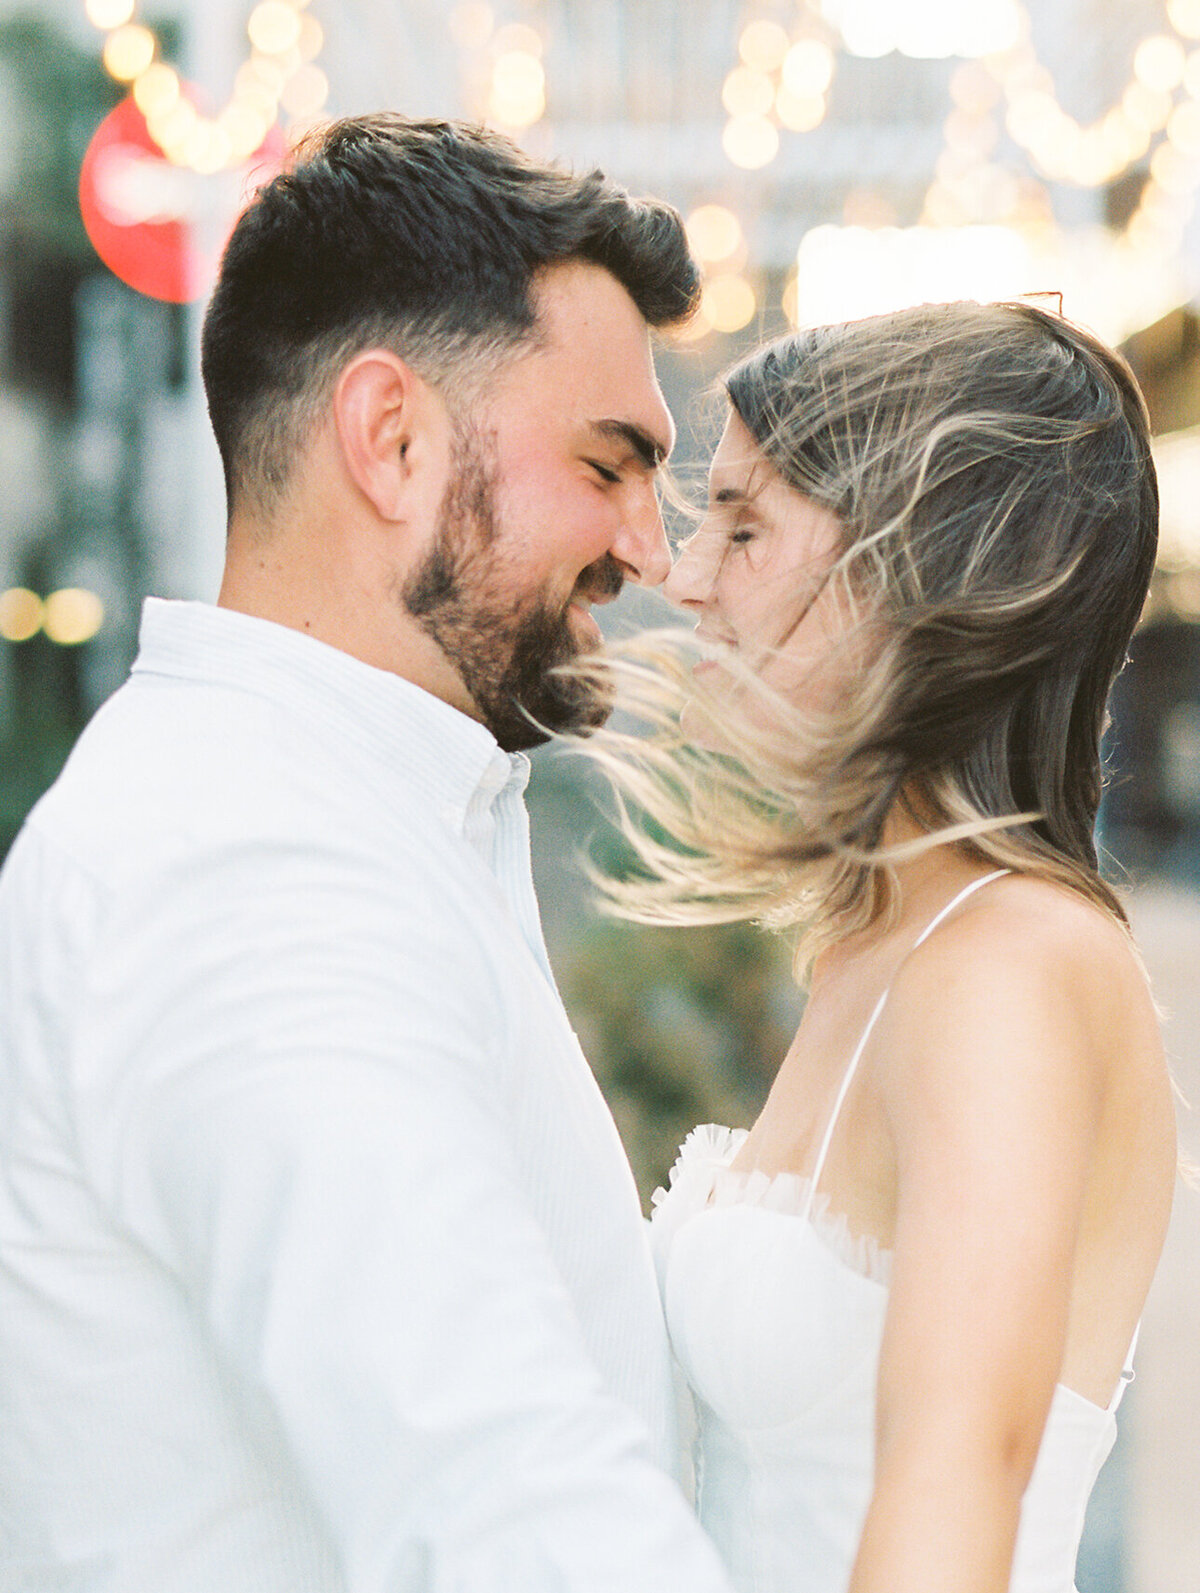 Close up of man and woman with their heads together with hair blowing in the wind